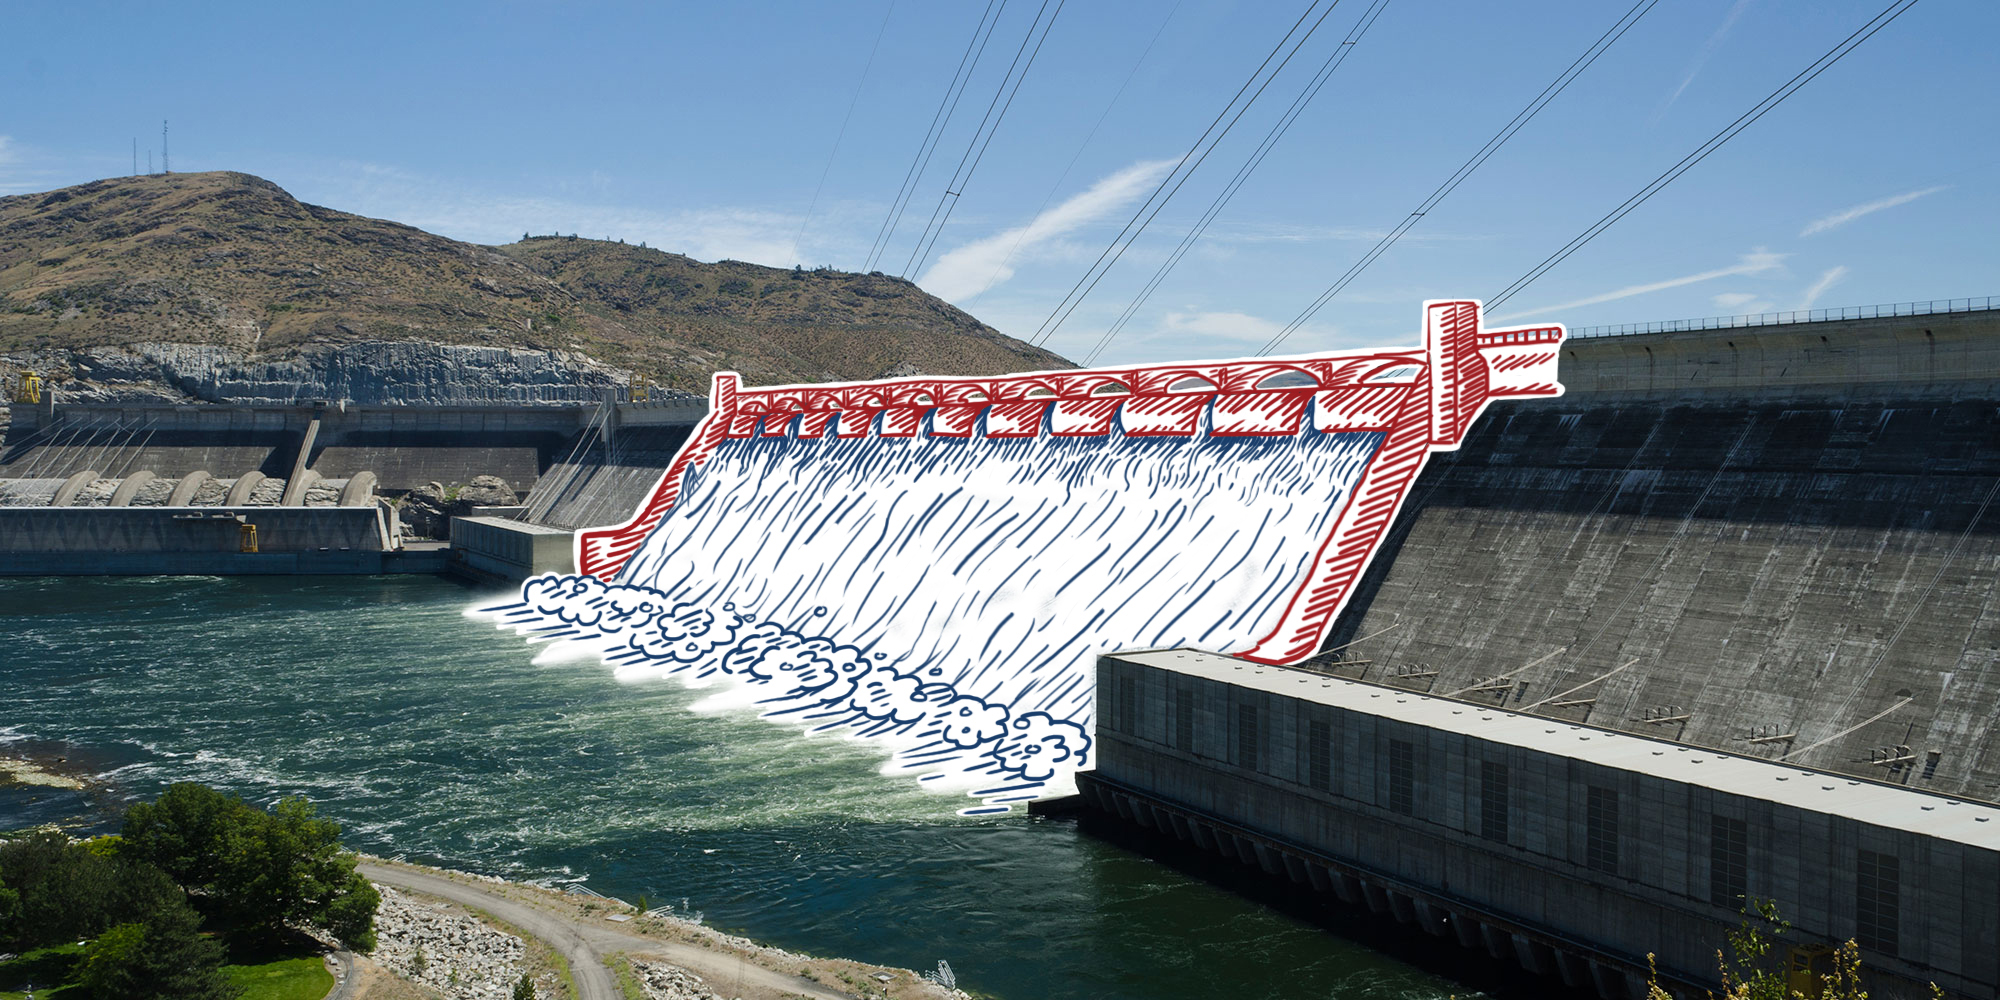 Introduction to Hydropower